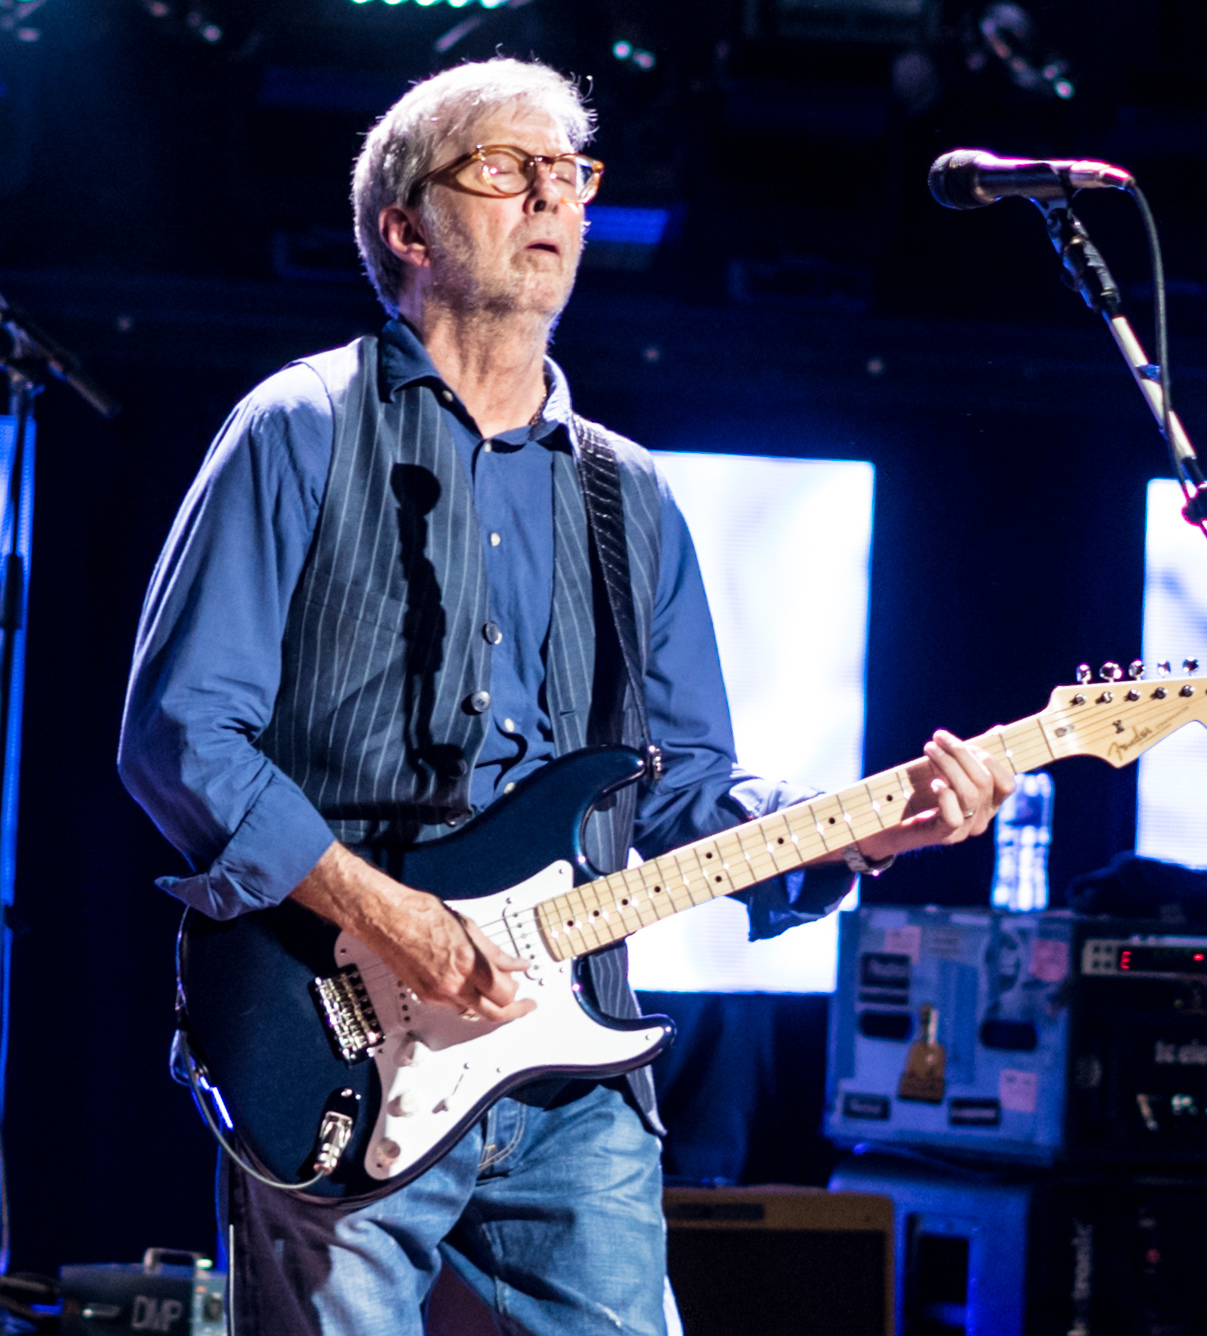 taille-eric-clapton-Image